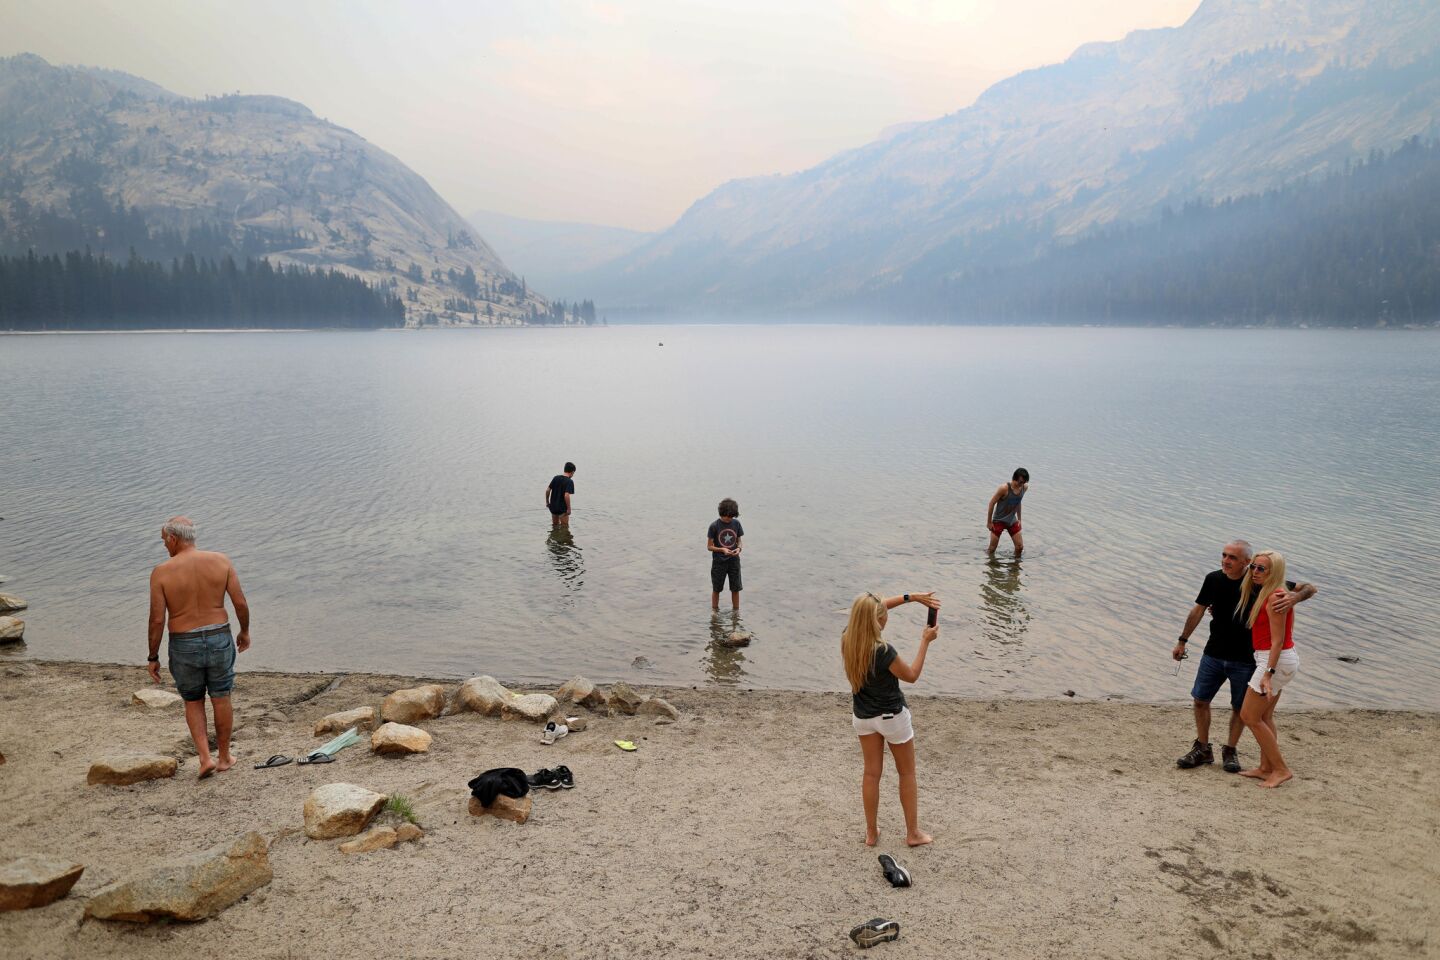 The Zutelman family of Buenos Aires wades in the Tenaya Lake as Yosemite National Park remains clouded in smoke from the Ferguson fire.